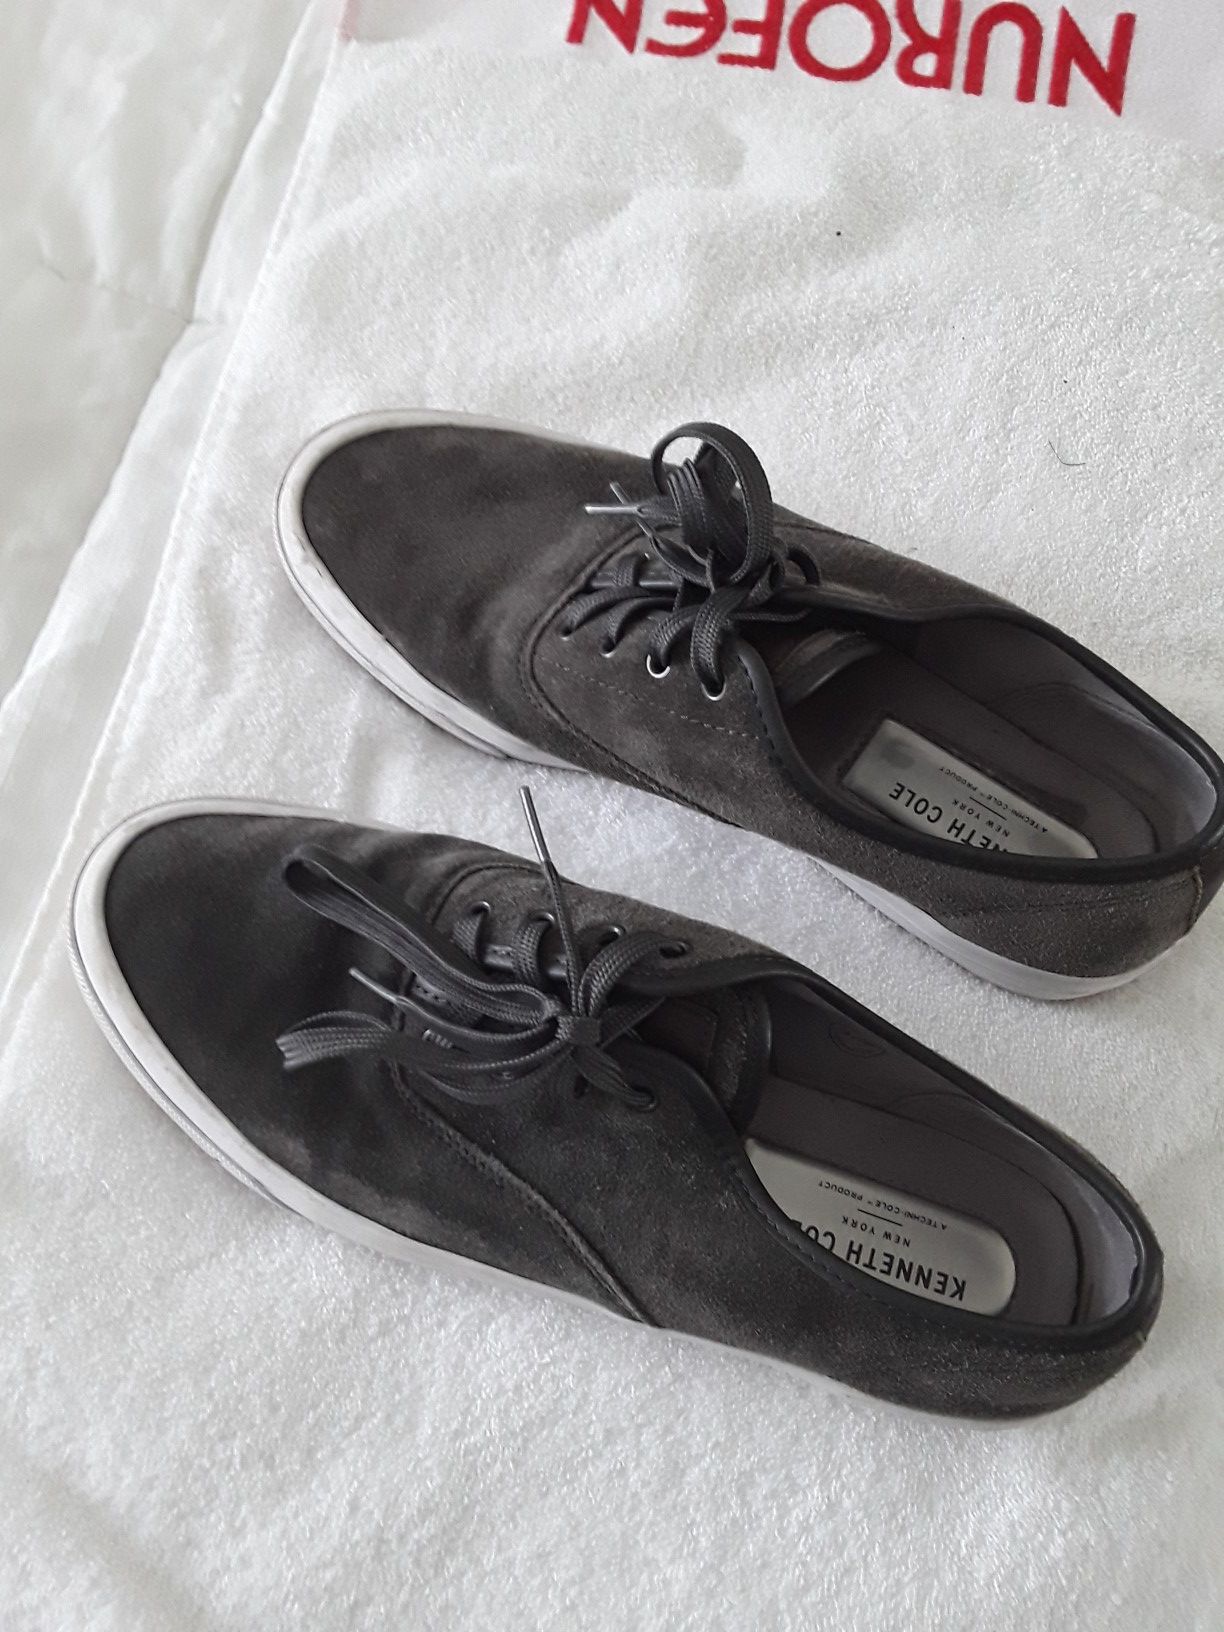 Kenneth cole size 10.5 suede shoes almost new